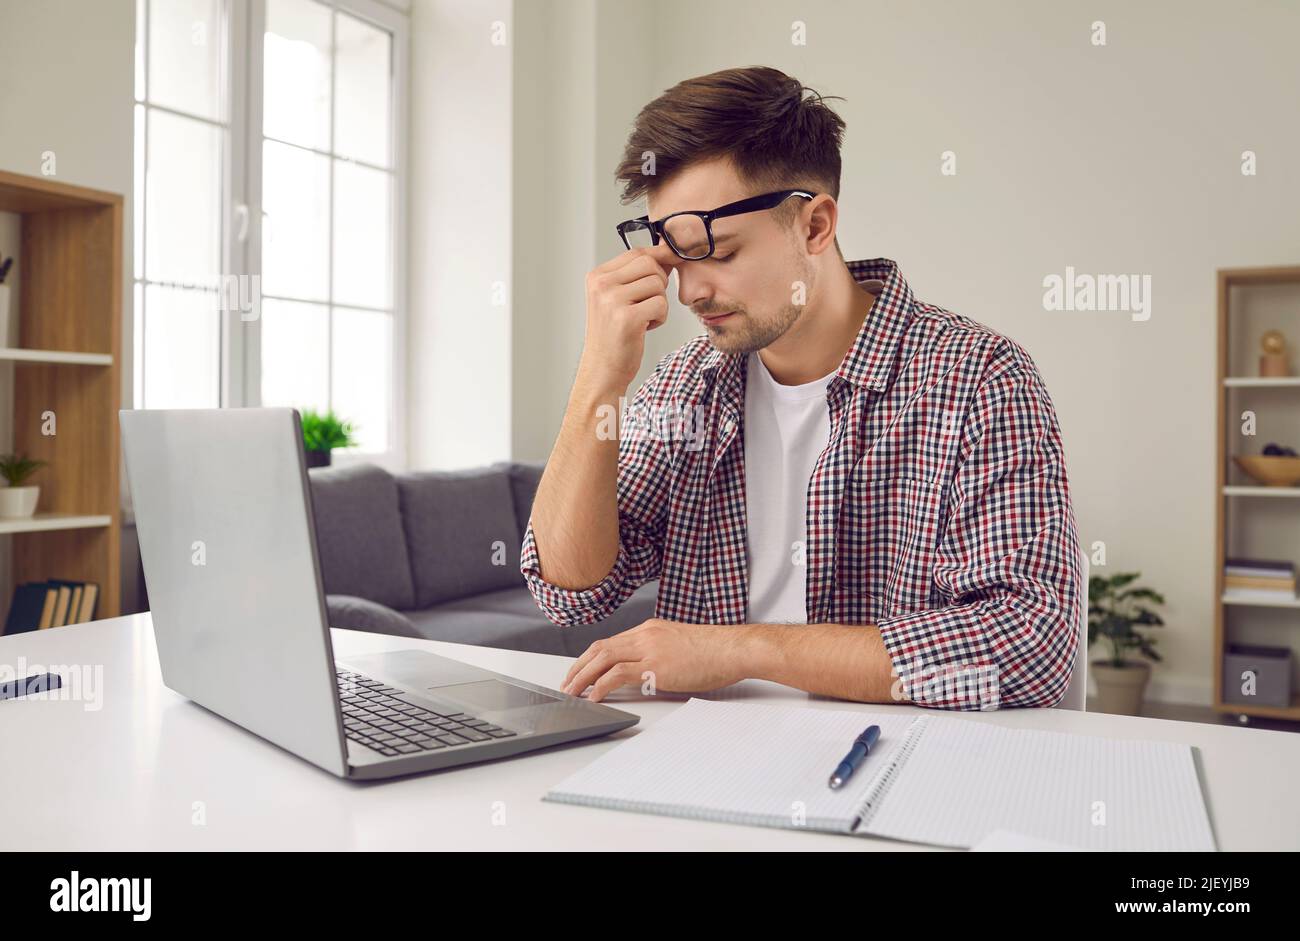 Sad tired overworked young man working on laptop rubs between eyes trying to remember something. Stock Photo